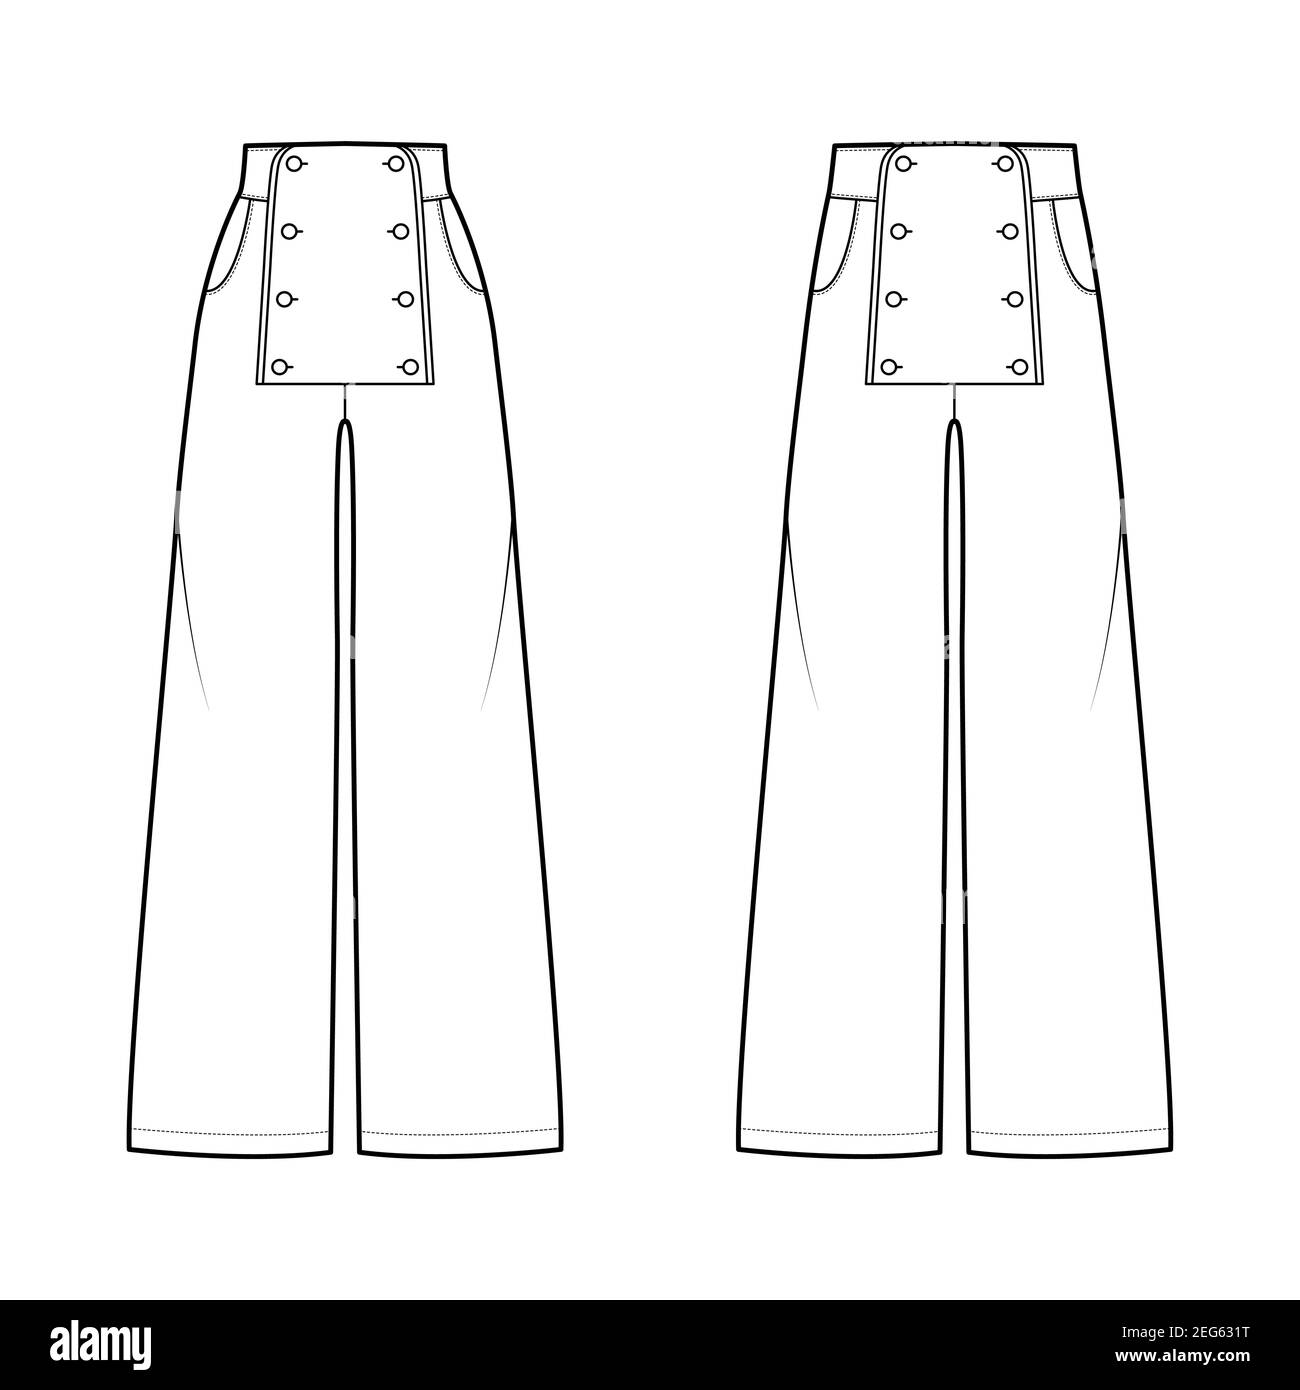 Details 68+ sailor trousers womens - in.cdgdbentre